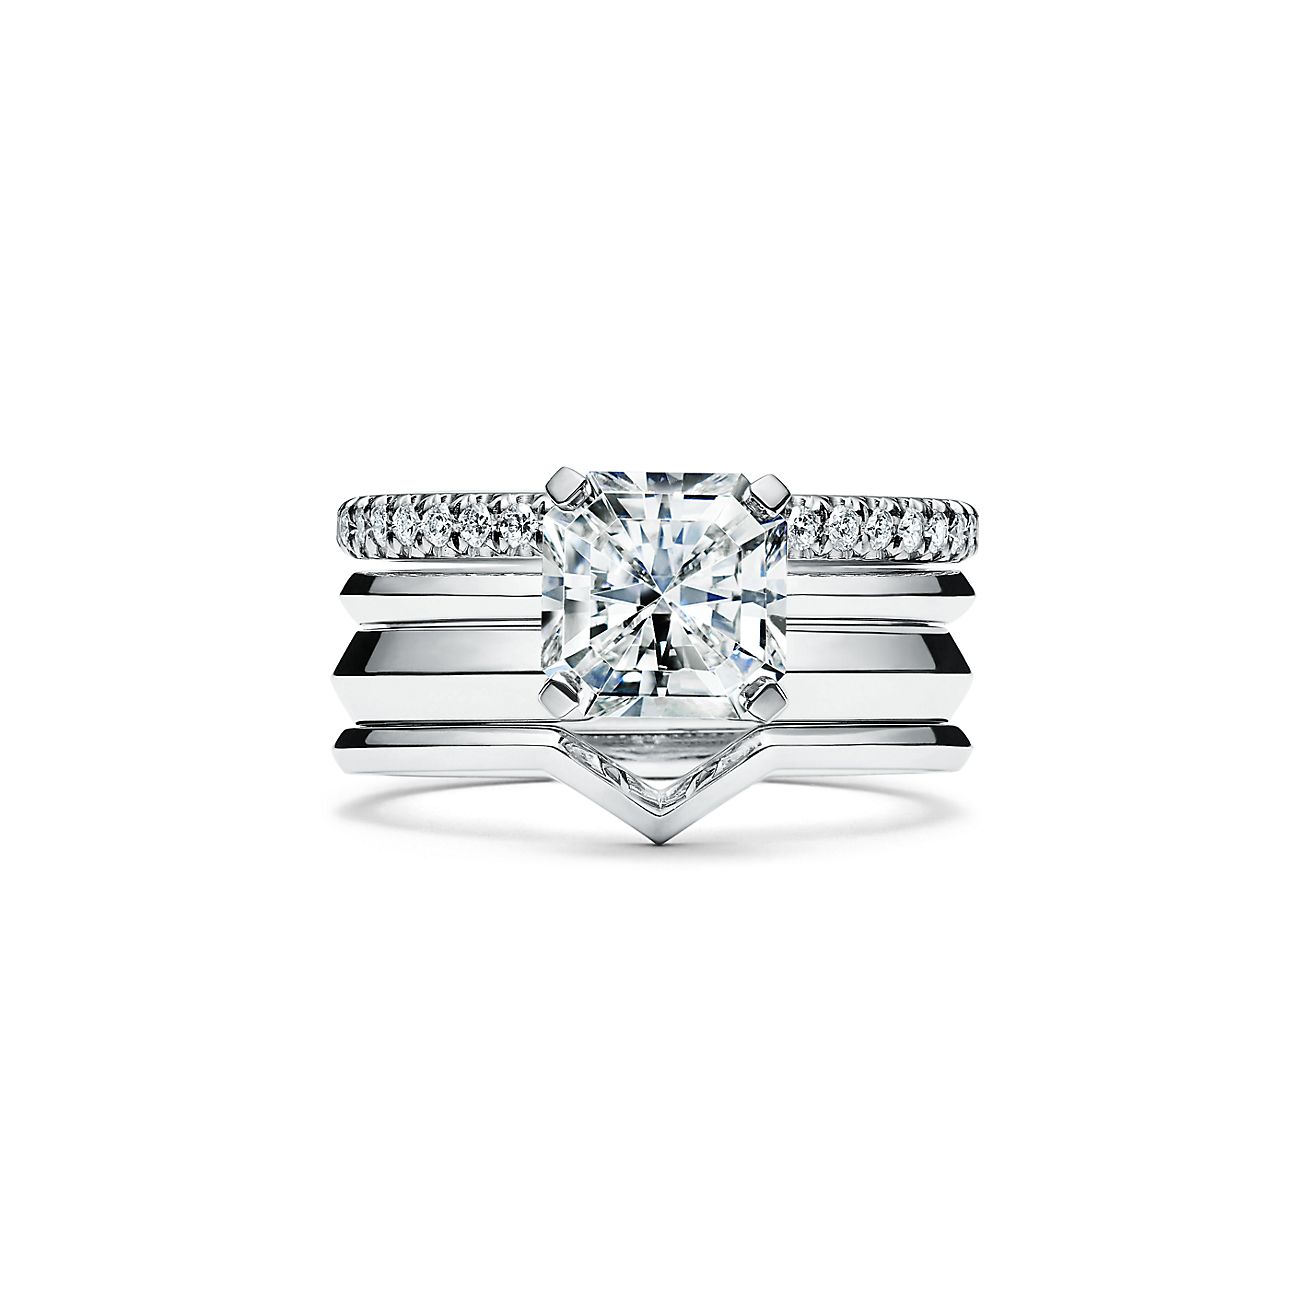 tiffany and co true ring